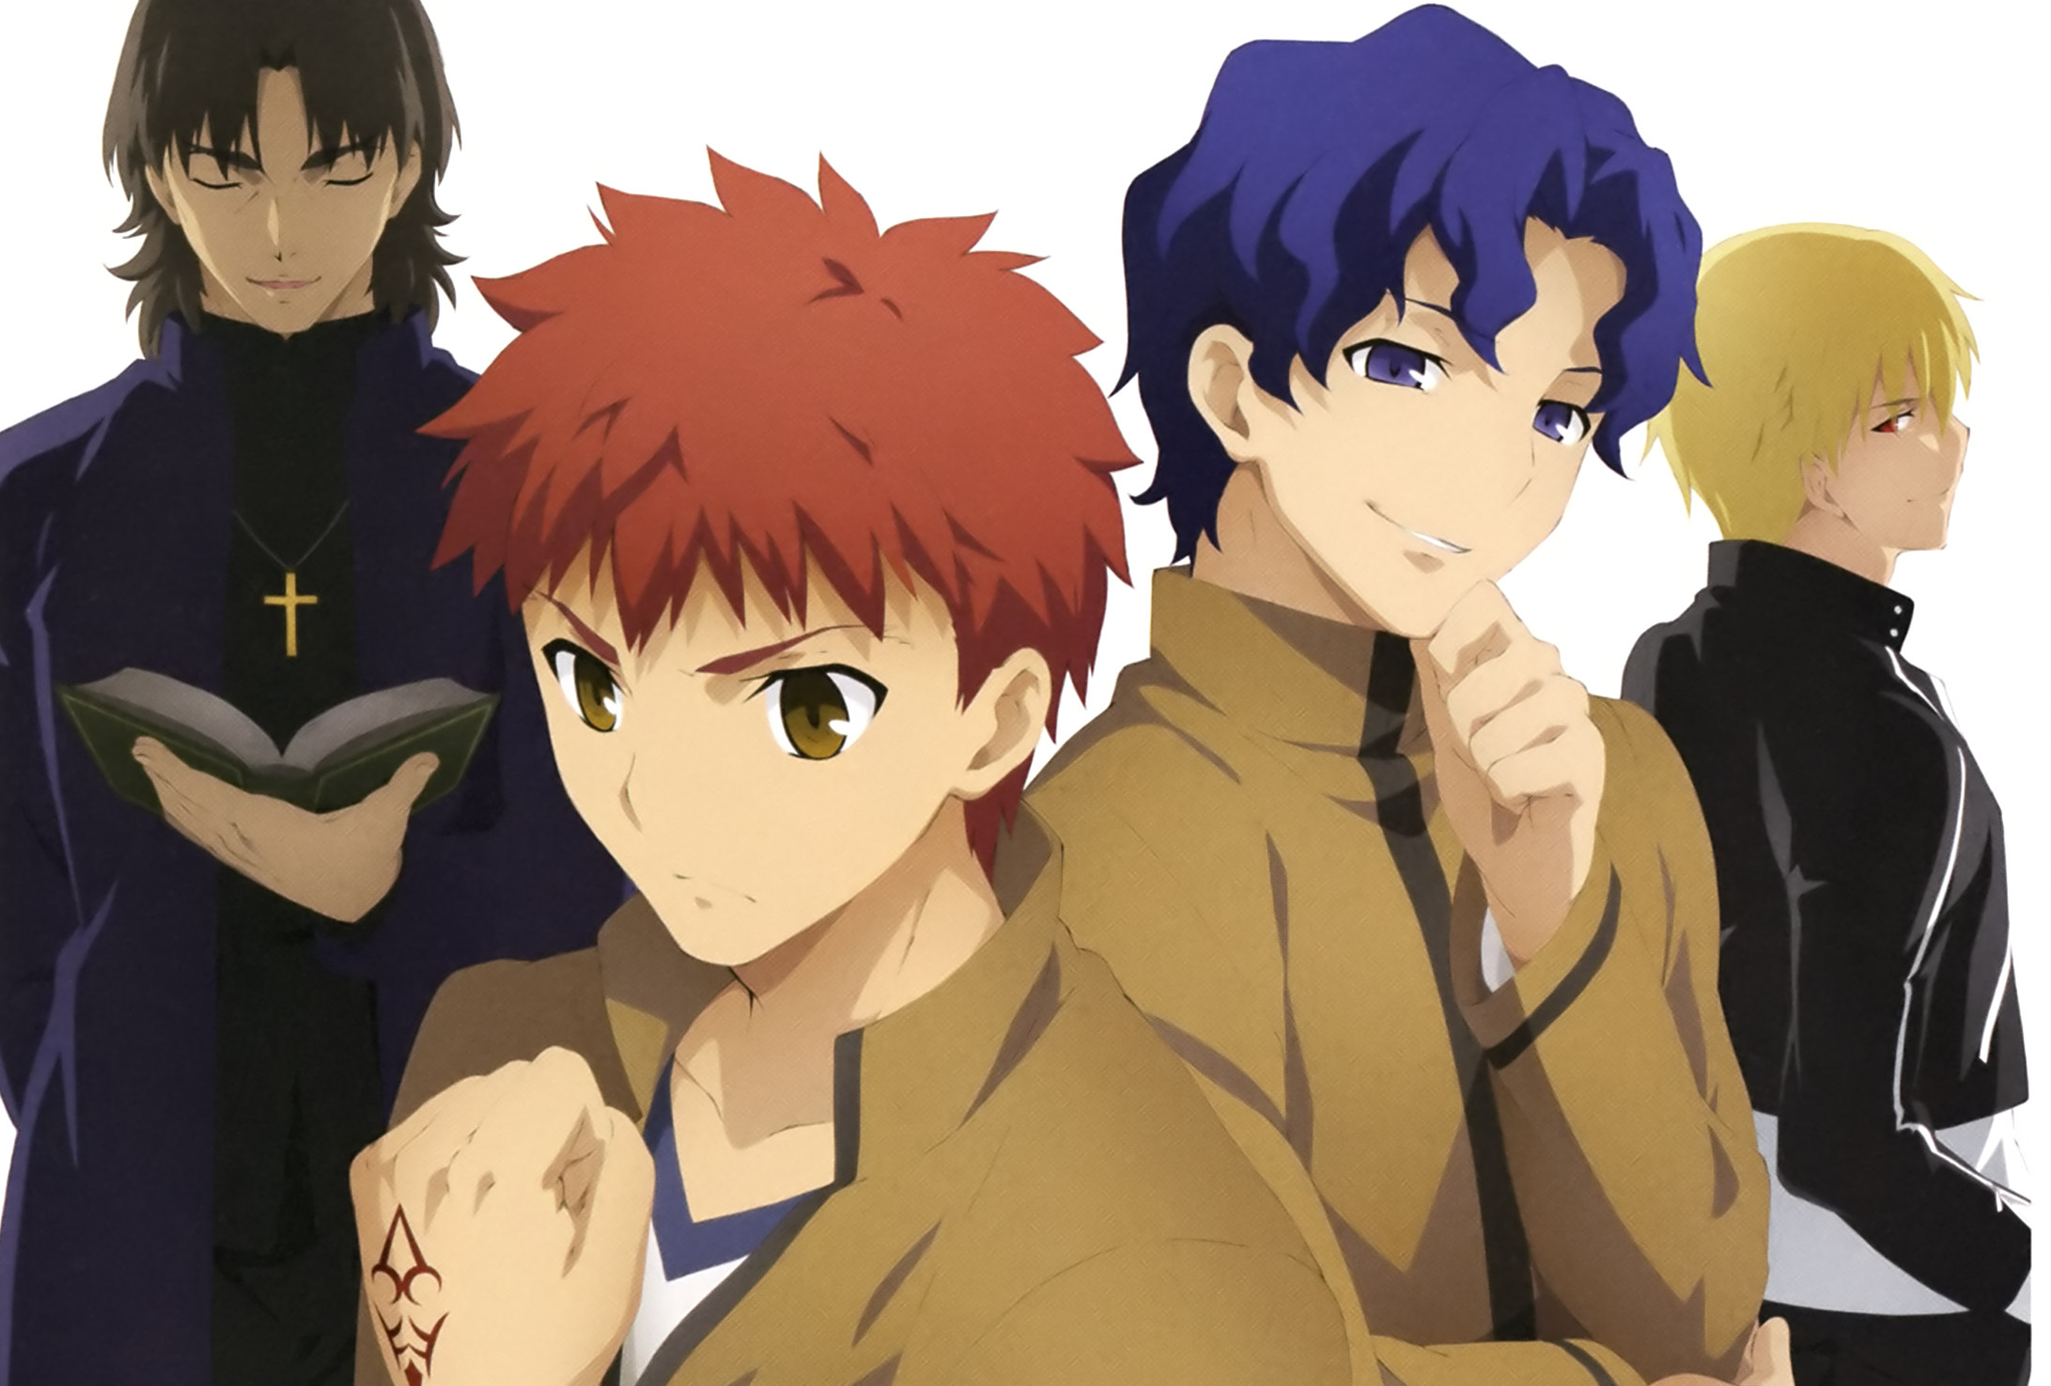 Download Fate / Stay Night Anime Characters Wallpaper | Wallpapers.com